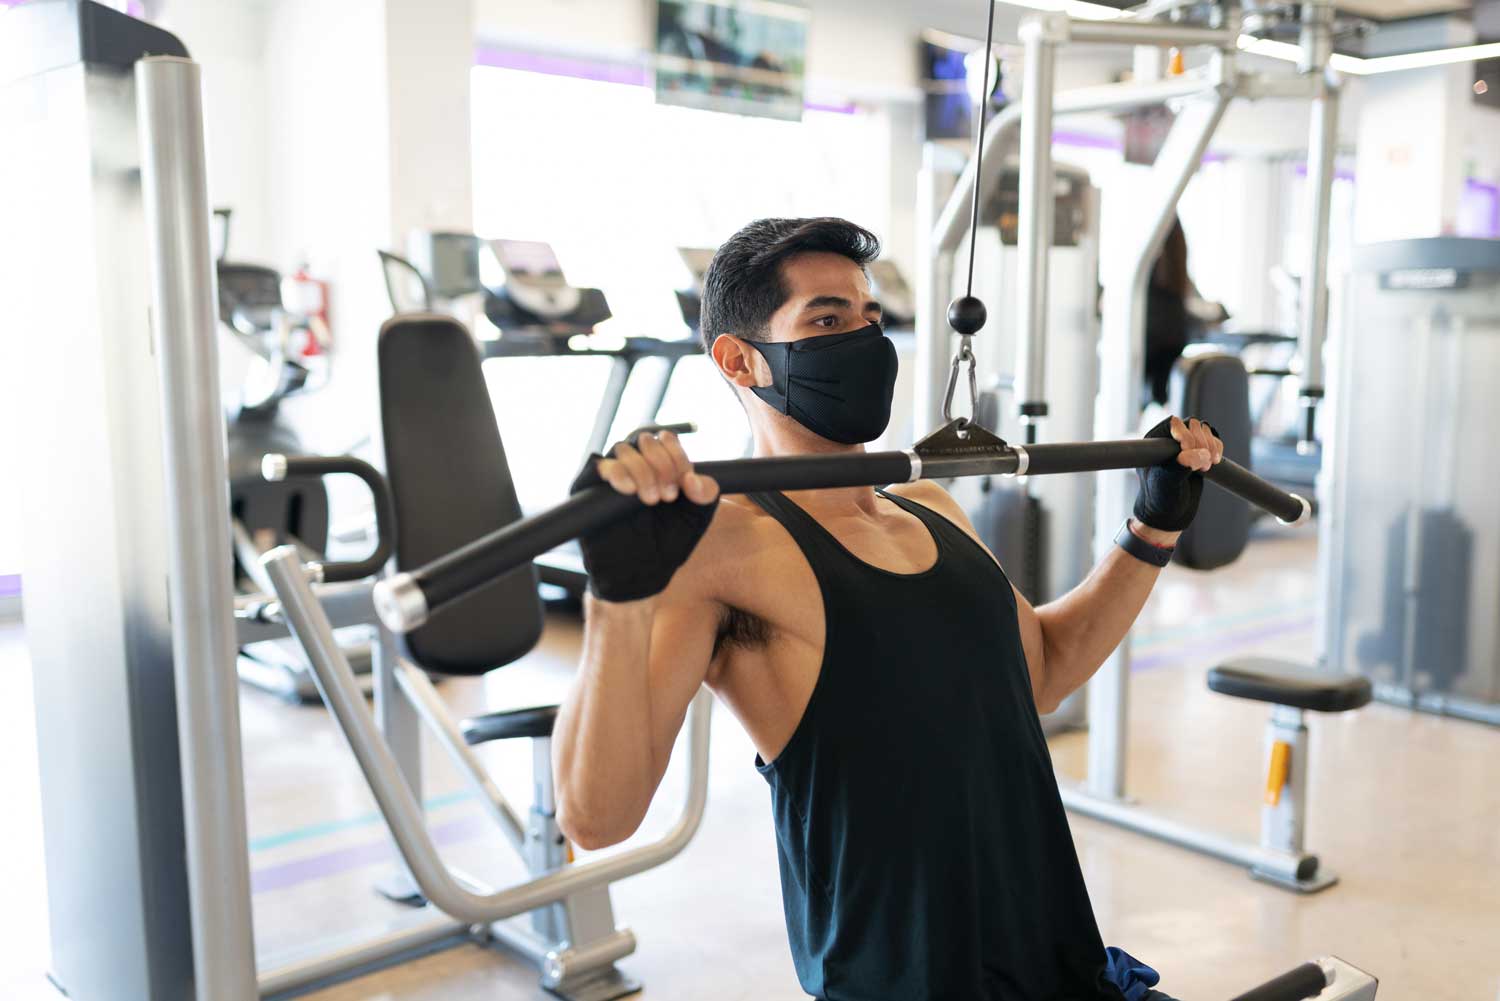 Man wearing mask at gym post Covid | Spine & Sport Physical Therapy | San Diego, Irvine, Sacramento, CA